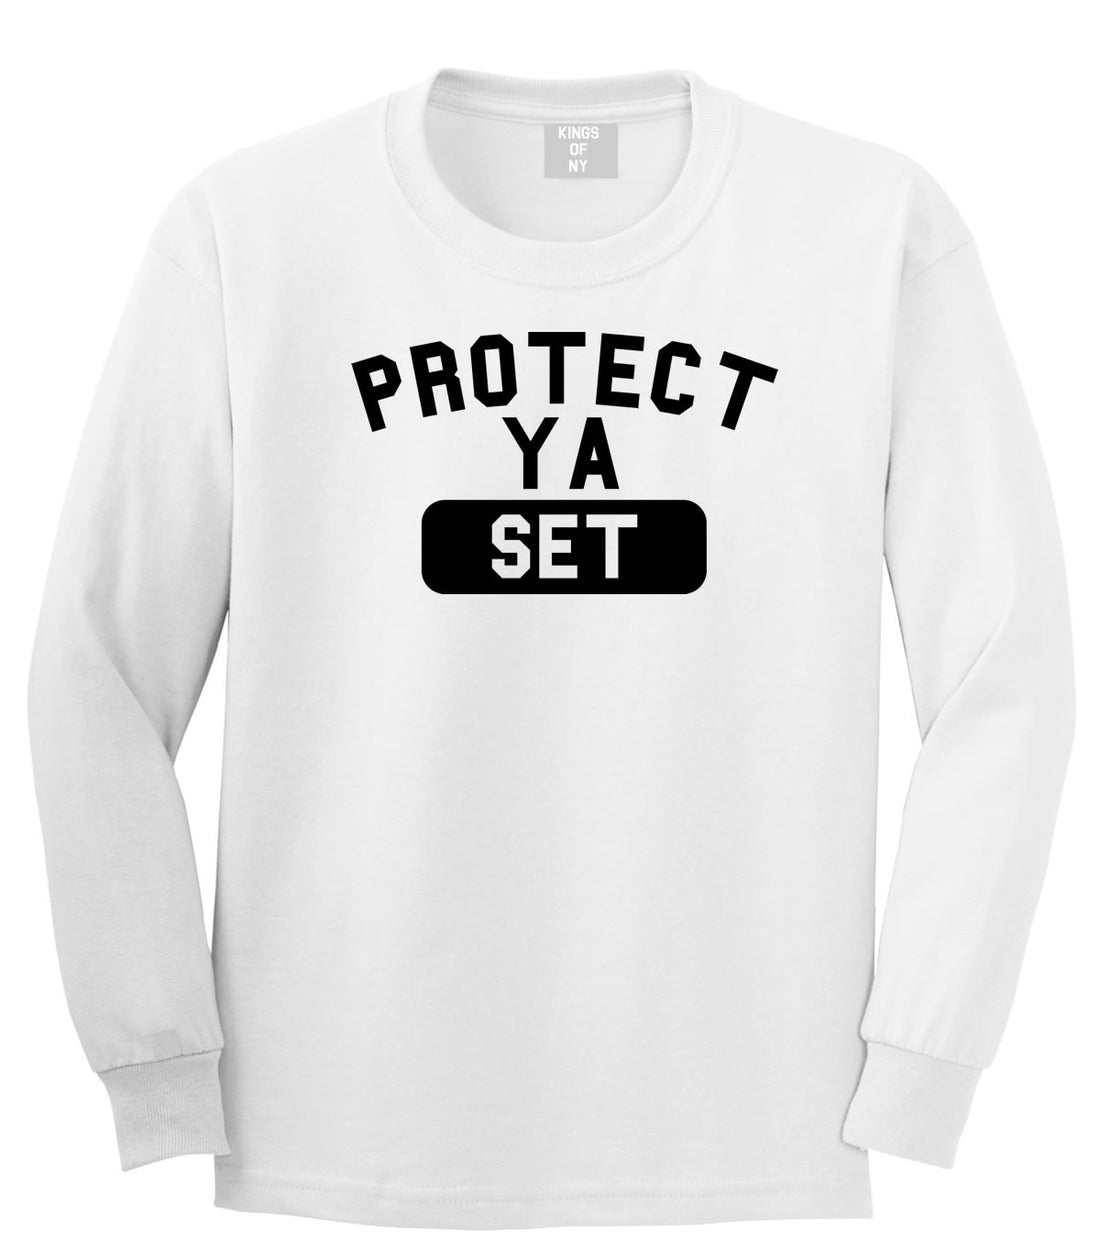 Protect Ya Set Neck Long Sleeve T-Shirt in White By Kings Of NY